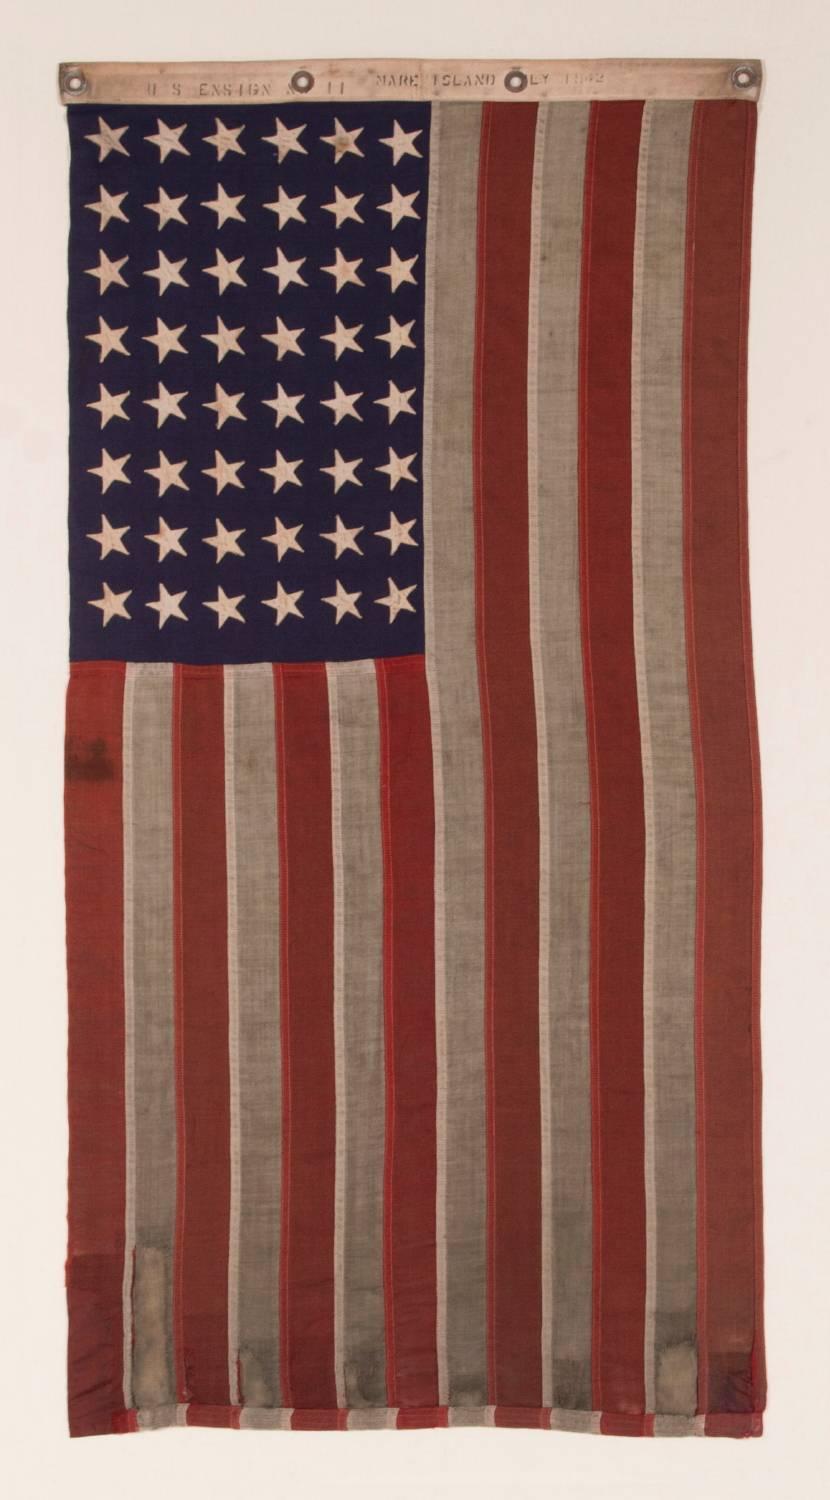 48 STAR, U.S. NAVY SMALL BOAT ENSIGN, MADE AT MARE ISLAND, CALIFORNIA [HEADQUARTERS OF THE PACIFIC FLEET] DURING WWII, SIGNED AND DATED JULY 1942, WITH EXTENSIVE WEAR FROM OBVIOUS USE:

48 star American national flag, made during World War II (U.S.